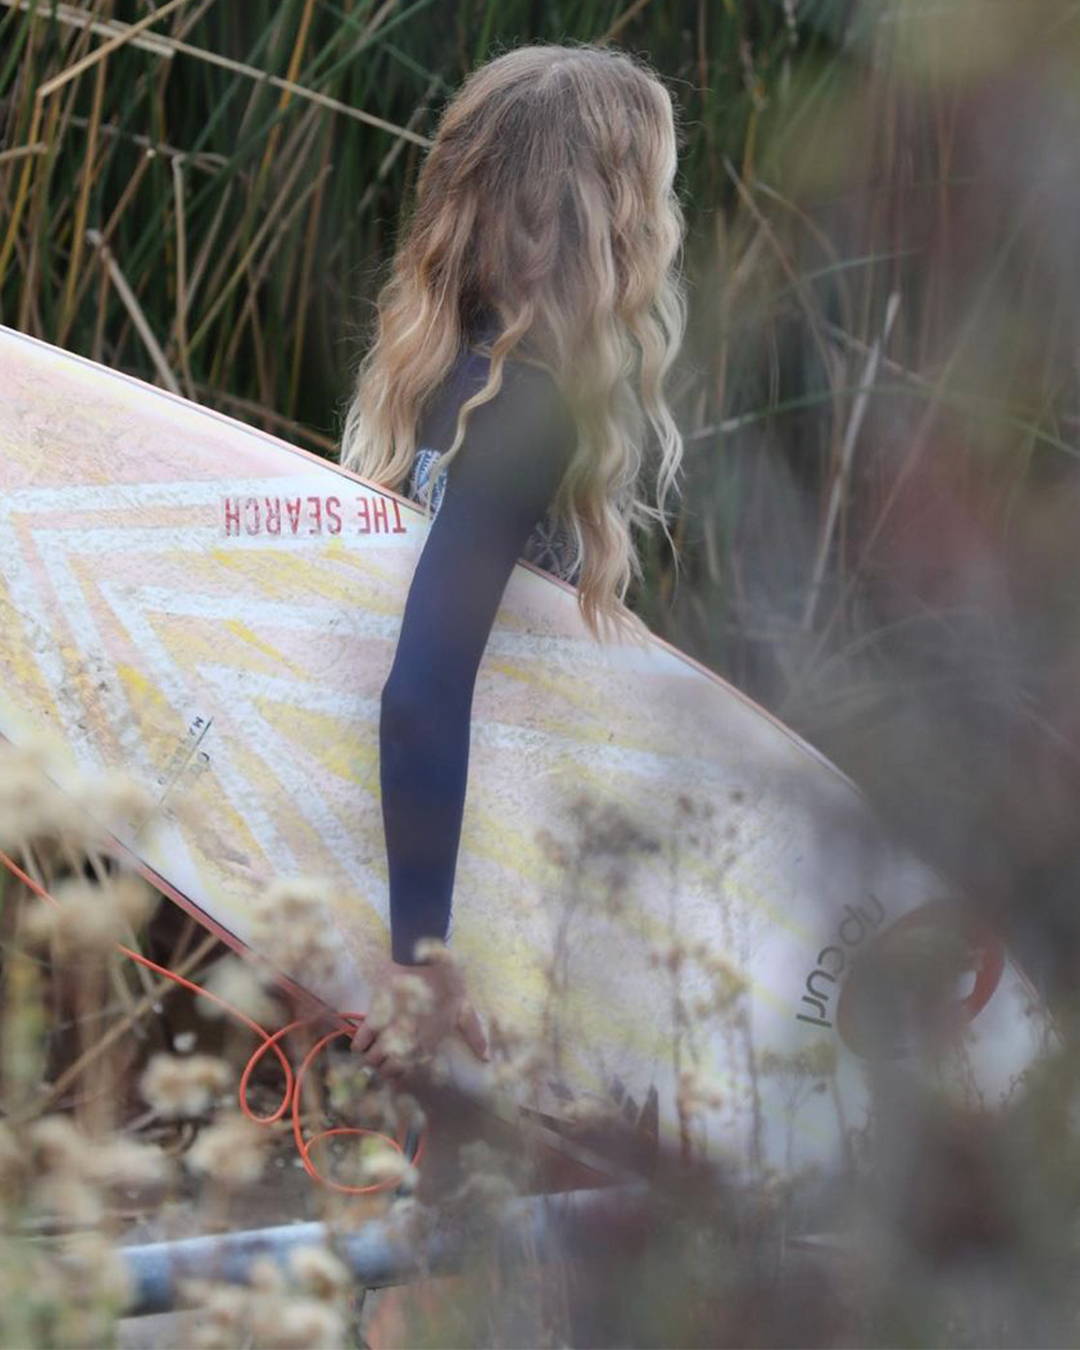  Image of a surfer holding a surfboard taken through greenery.